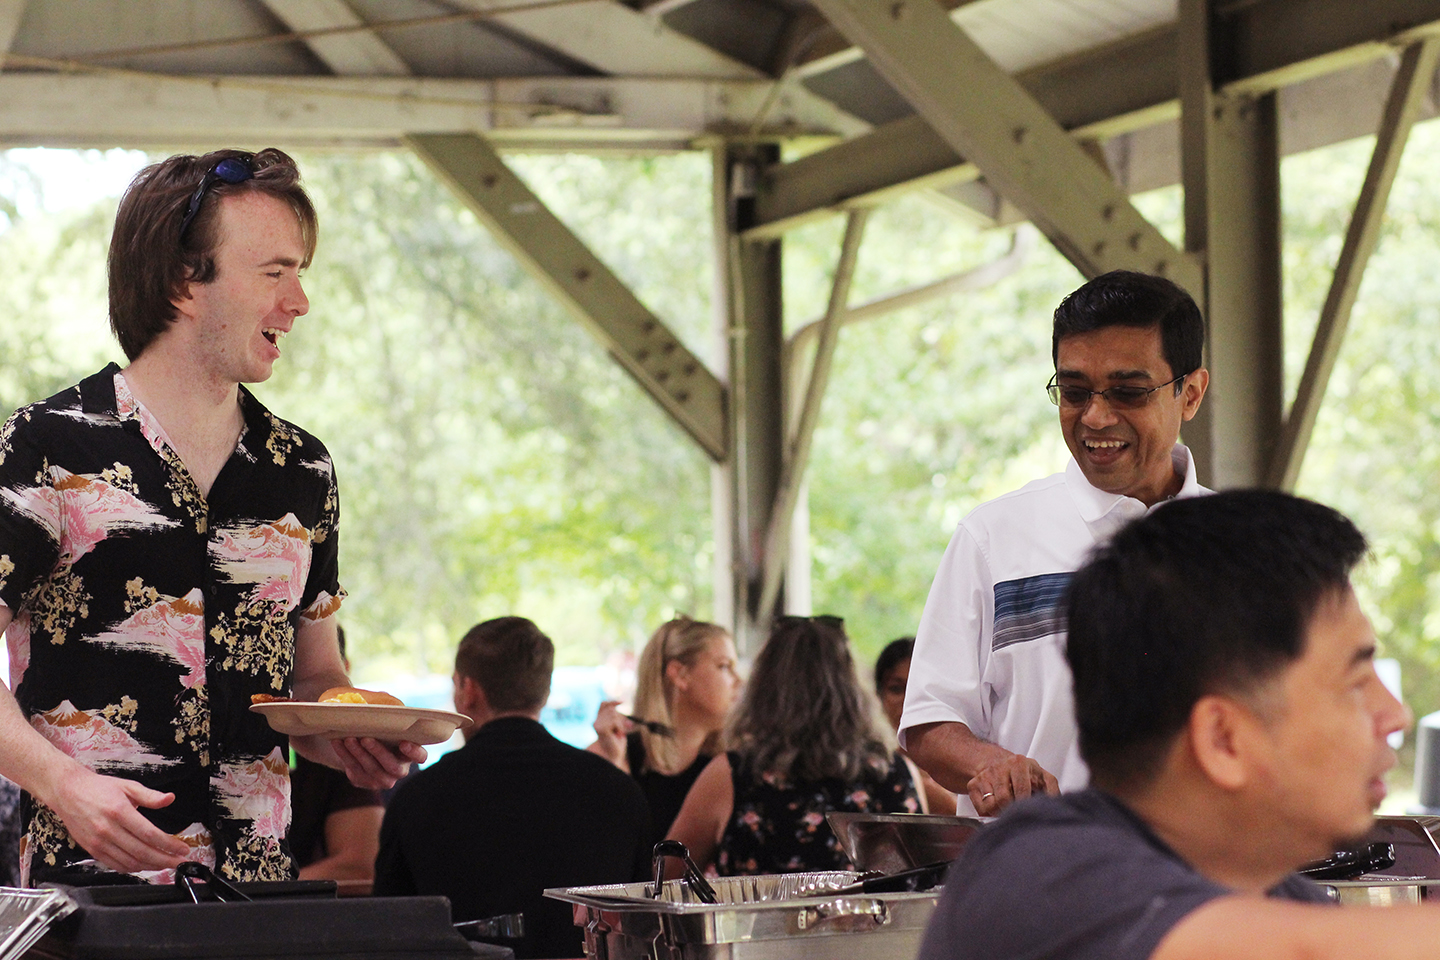 Chandan Mukhopadhyay (Synergy EVP & CTO) laughing and talking with another Synergist at company picnic while serving themselves food